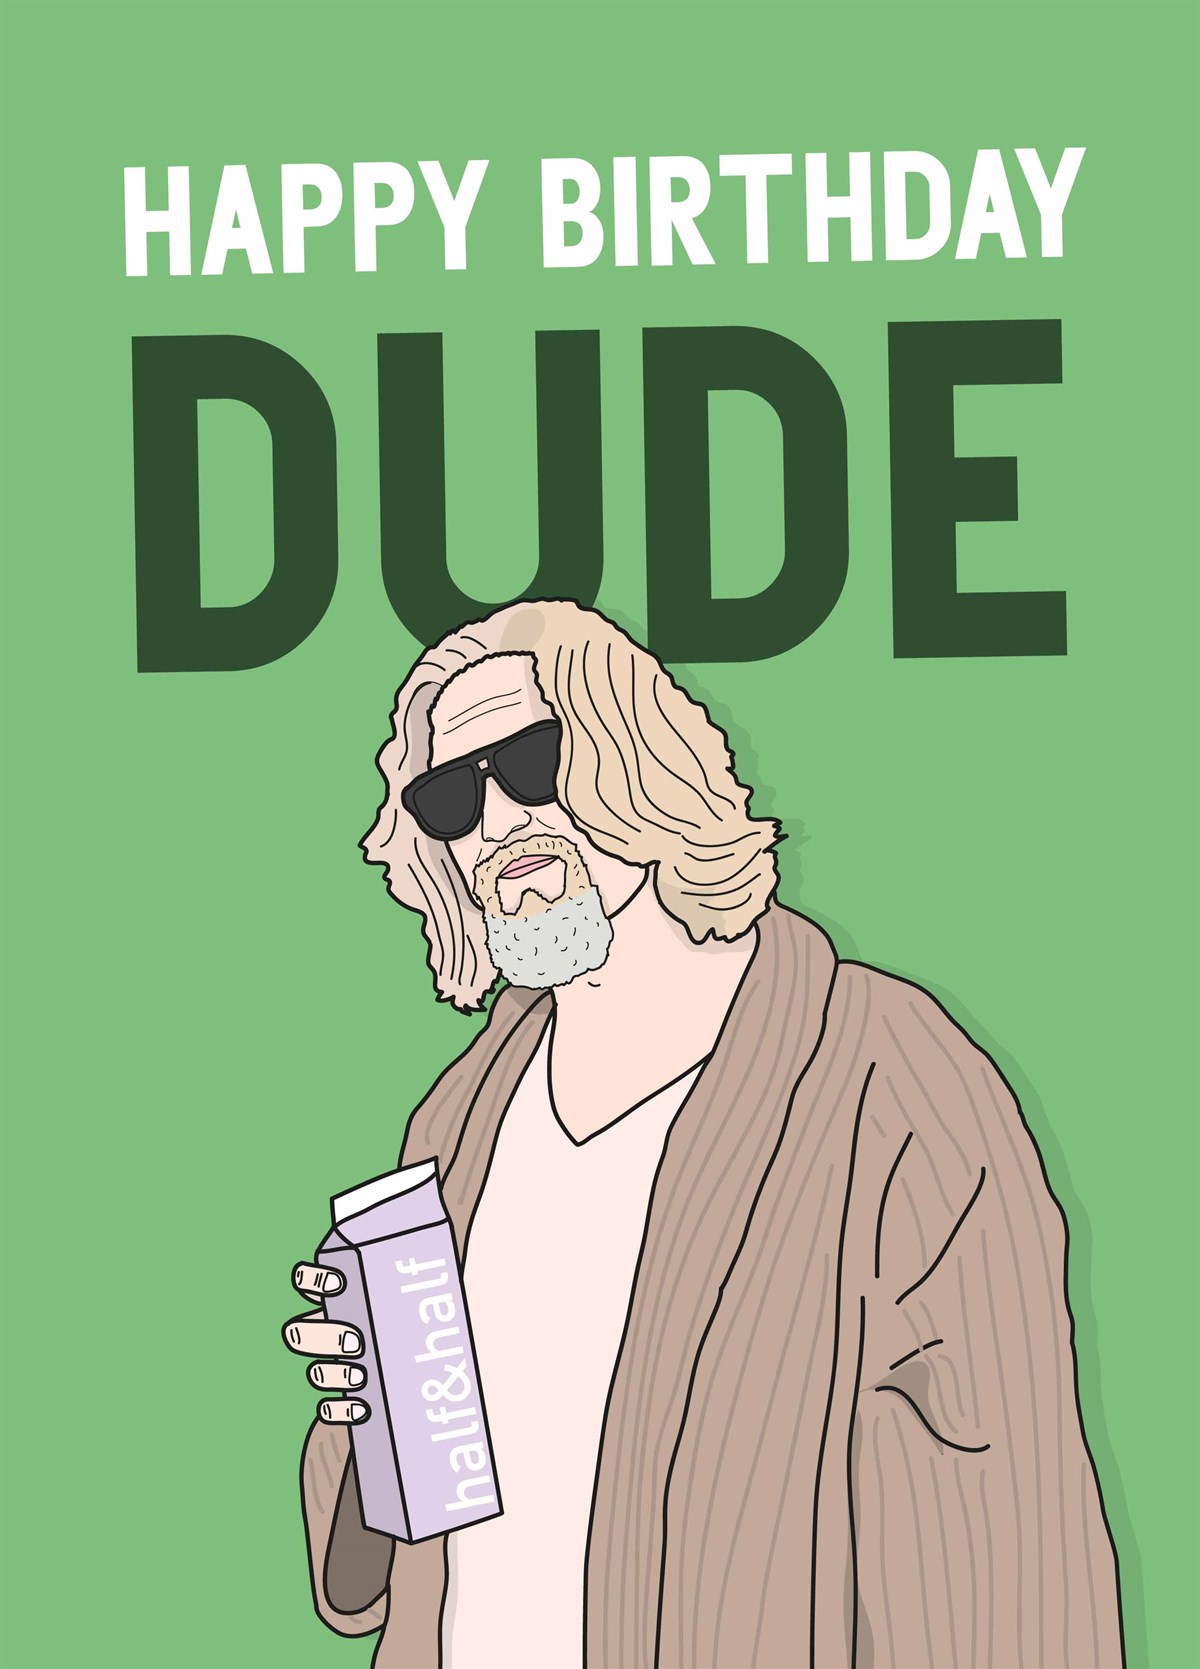 The Big Lebowski is the best film ever? 